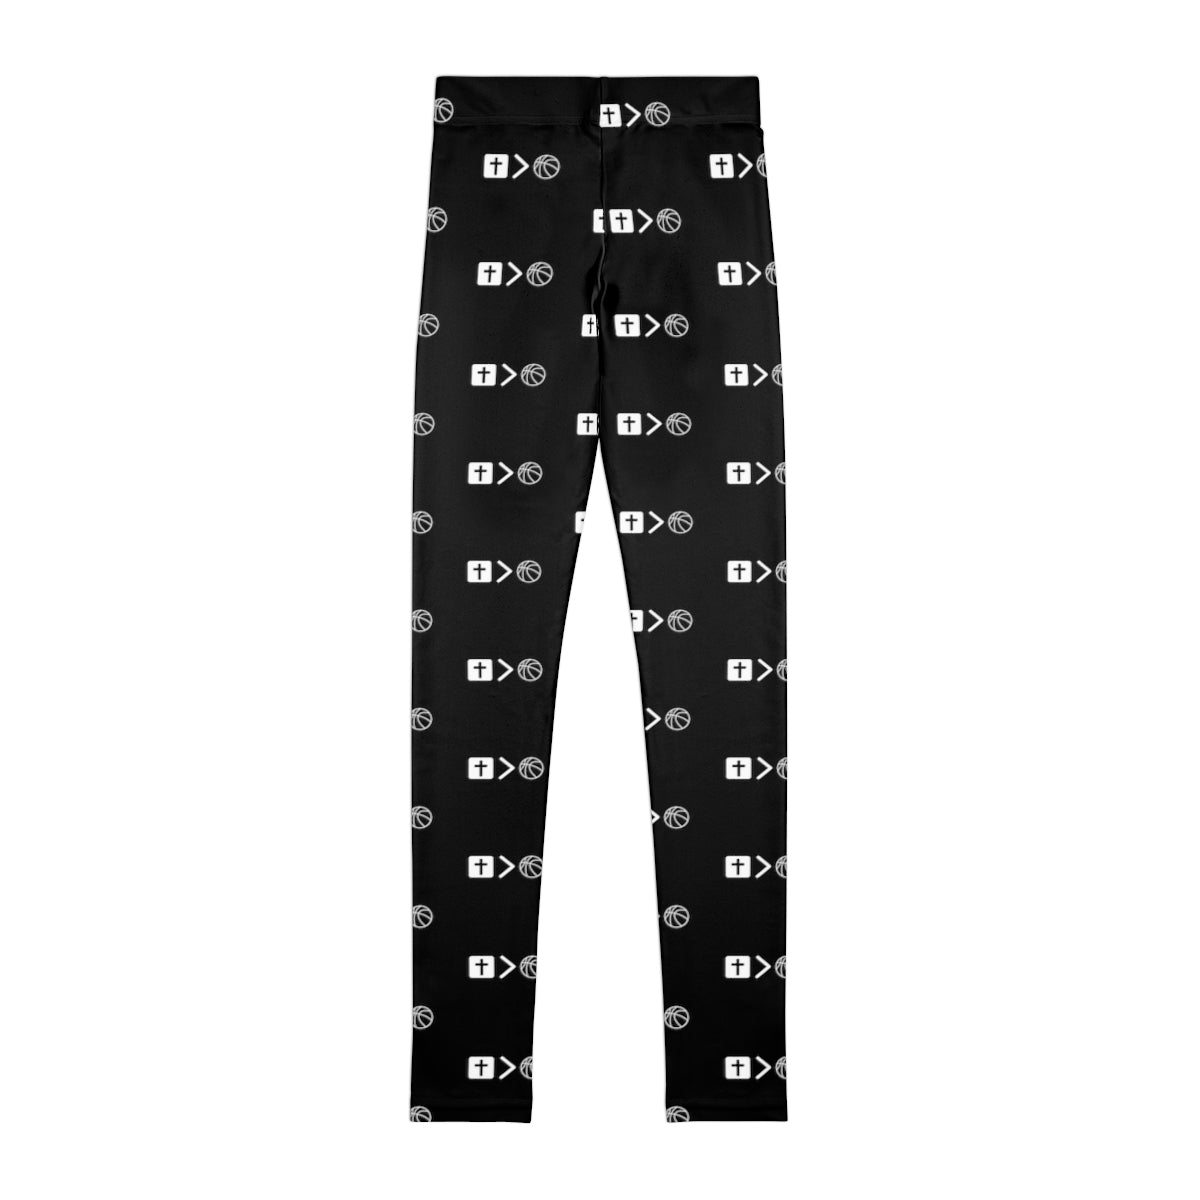 Jesus is Bigger than Basketball All over Print Youth Leggings